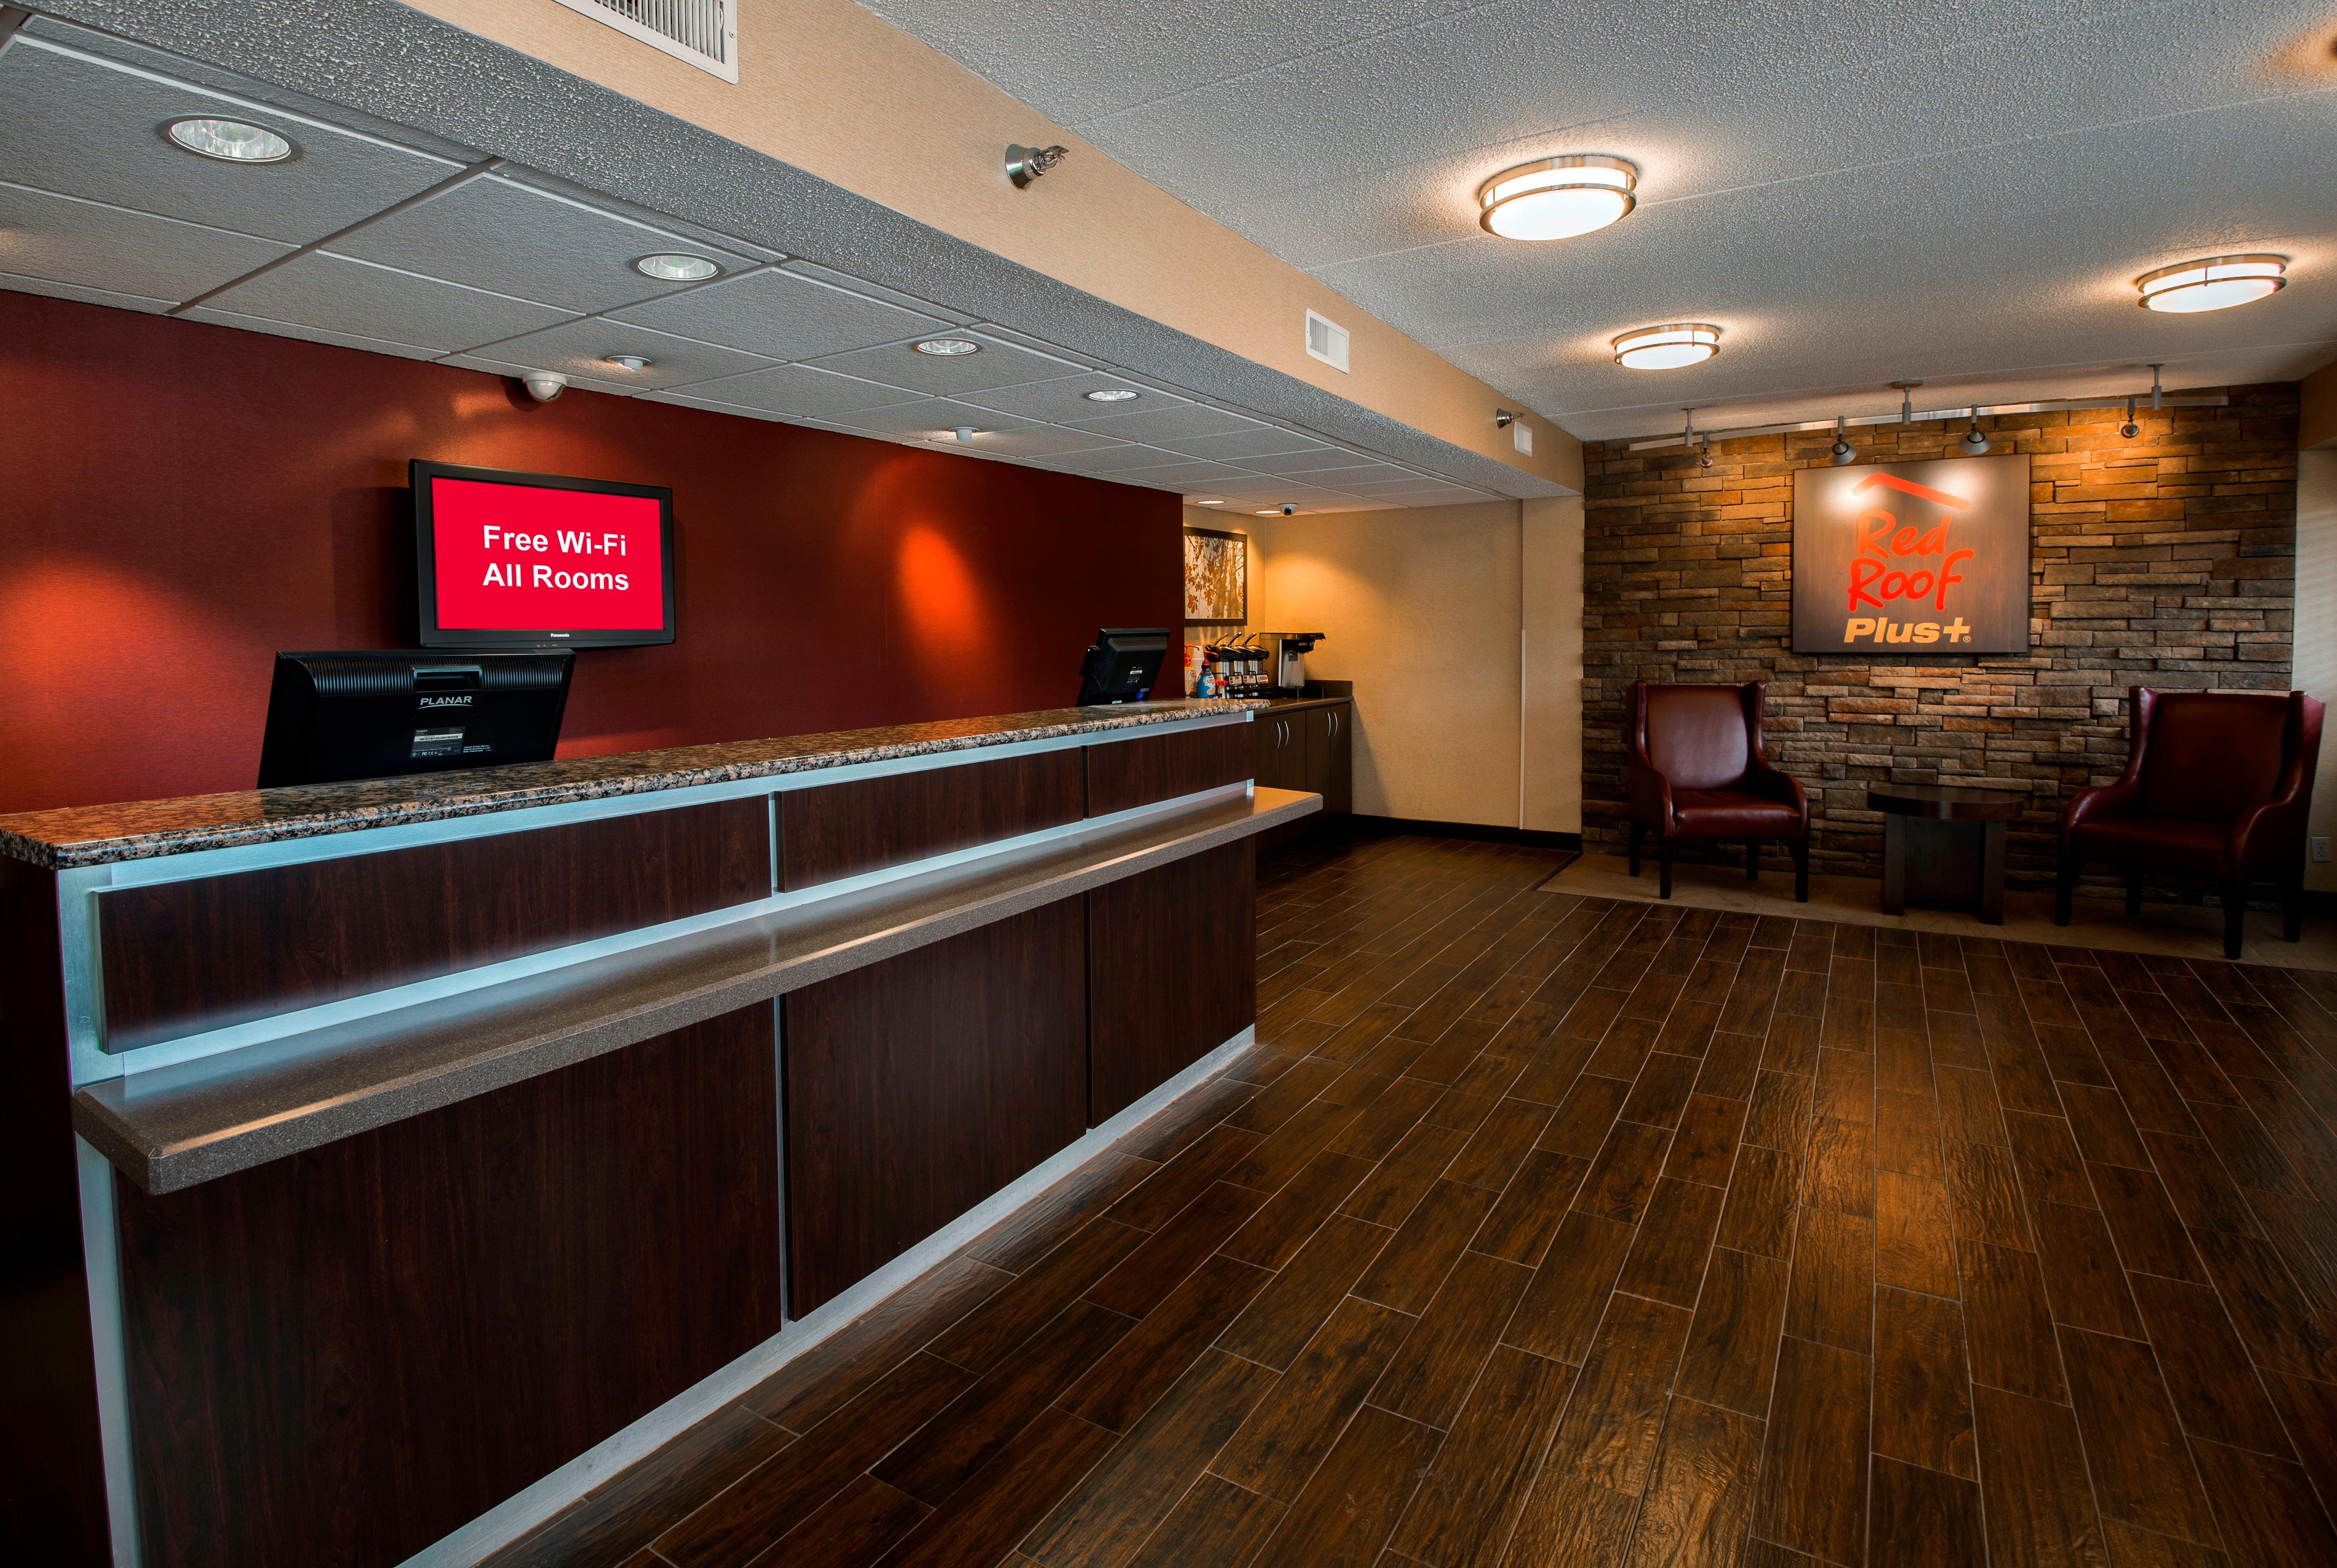 Red Roof Inn Plus+ Chicago - Naperville Exterior foto